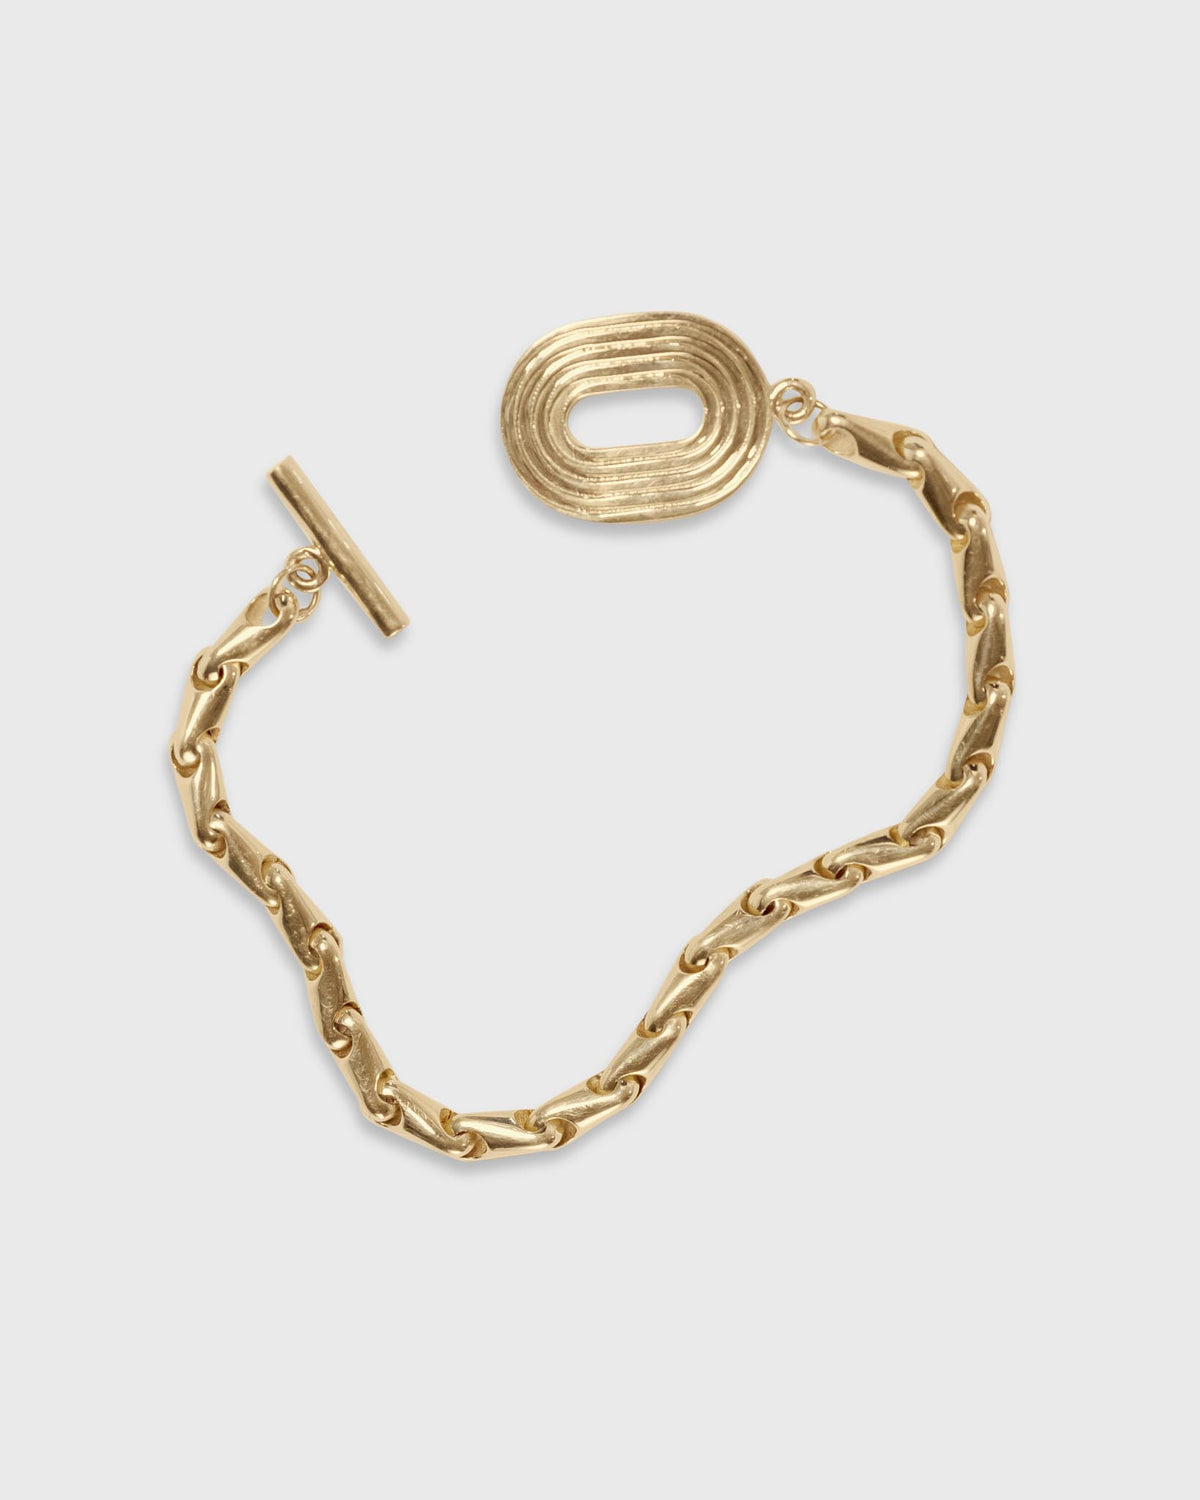 eight bracelet in solid 14k yellow gold opened